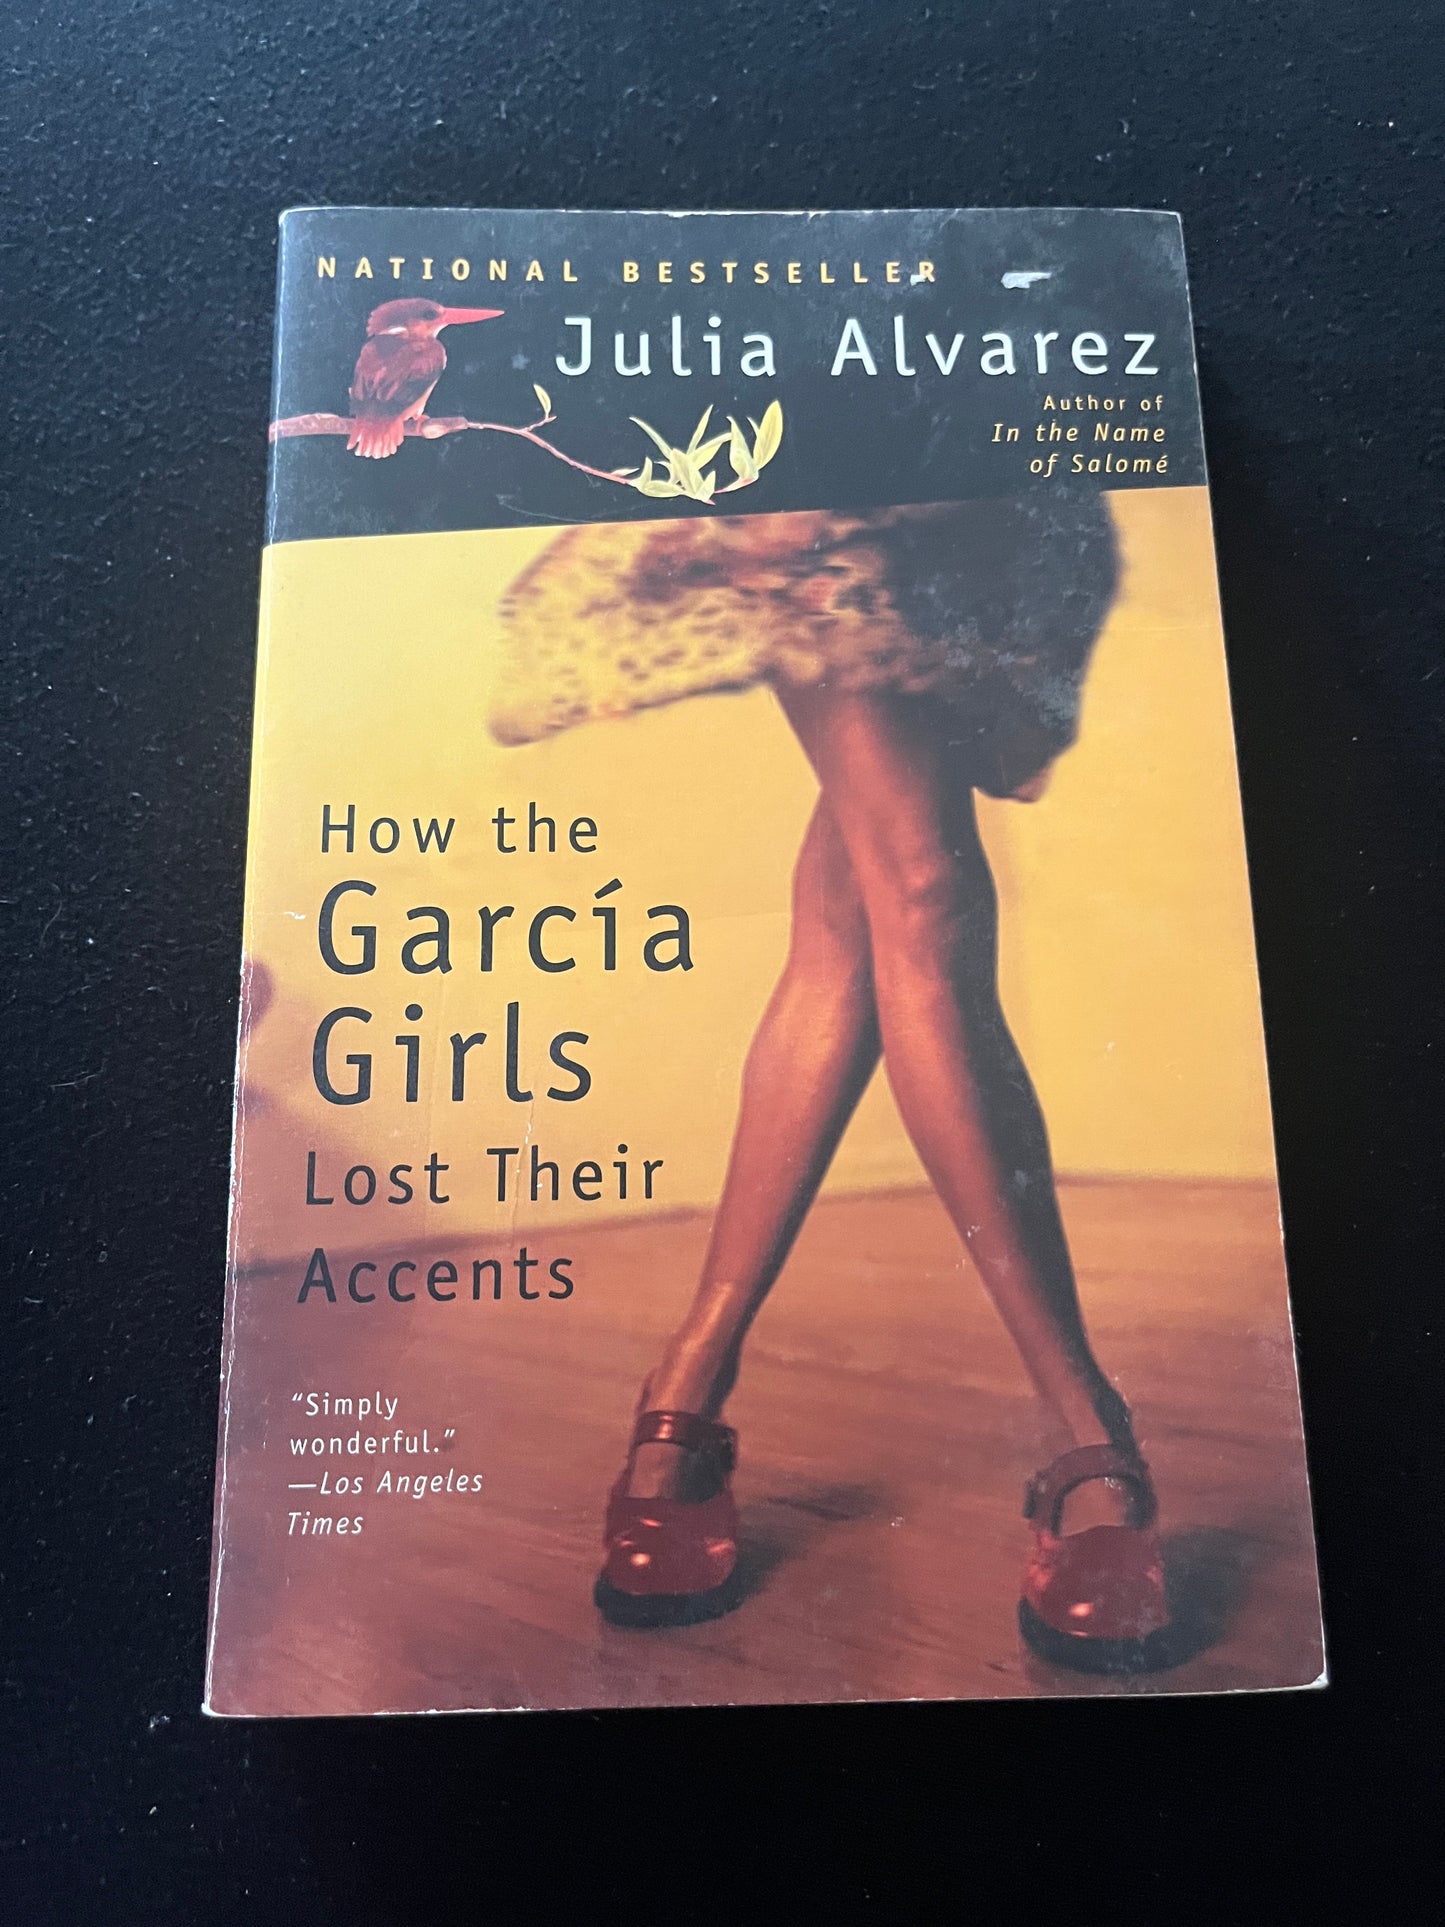 HOW THE GARIA GIRLS LOST THEIR ACCENTS by Julia Alvarez